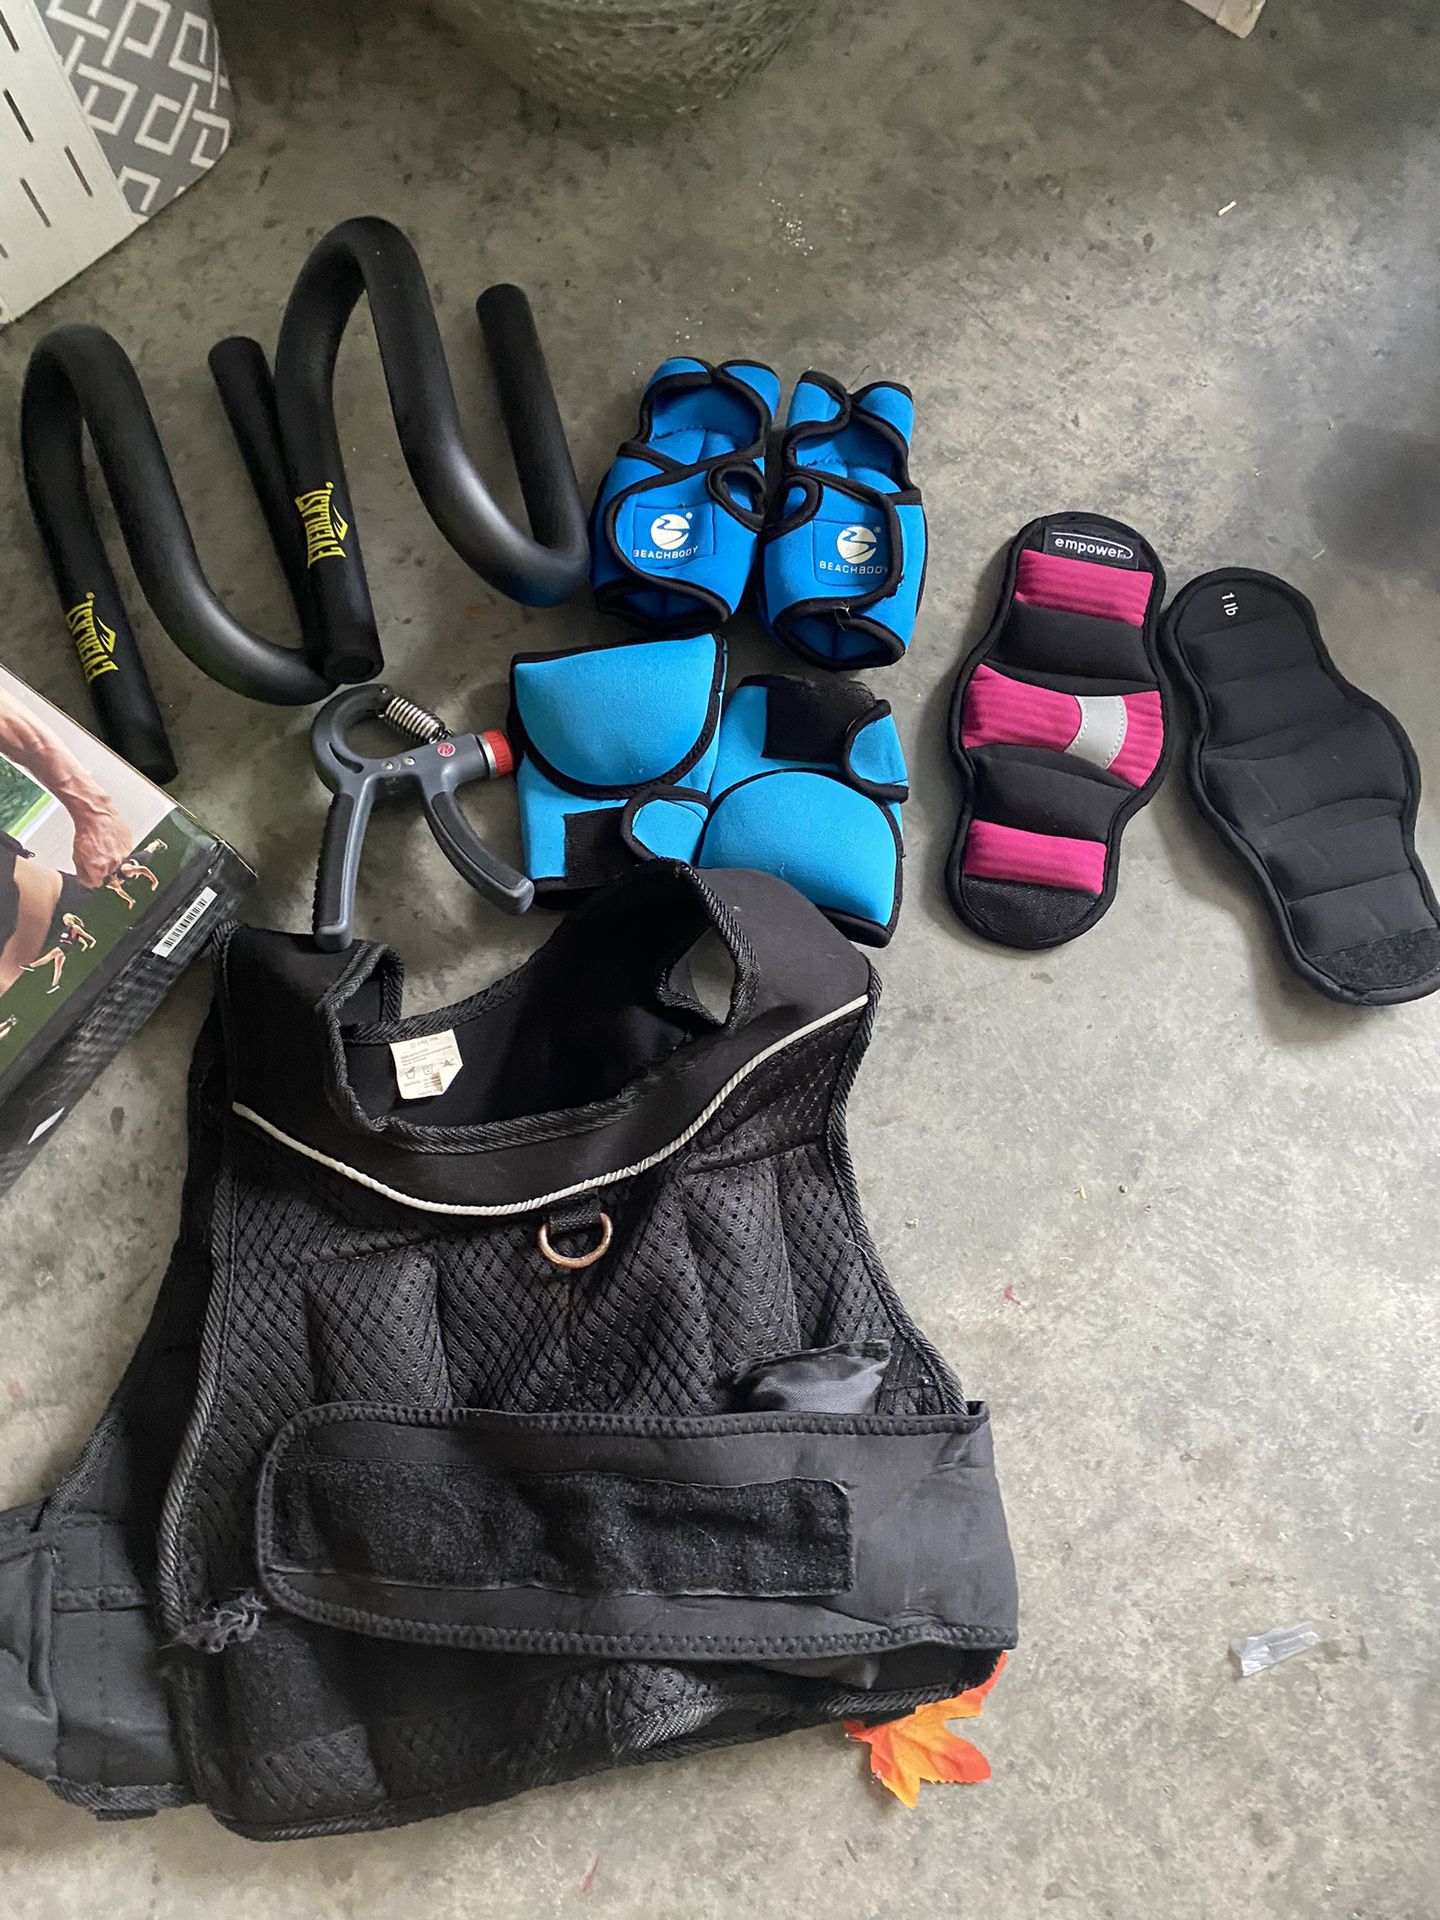 Weighted Vest And Equipment 